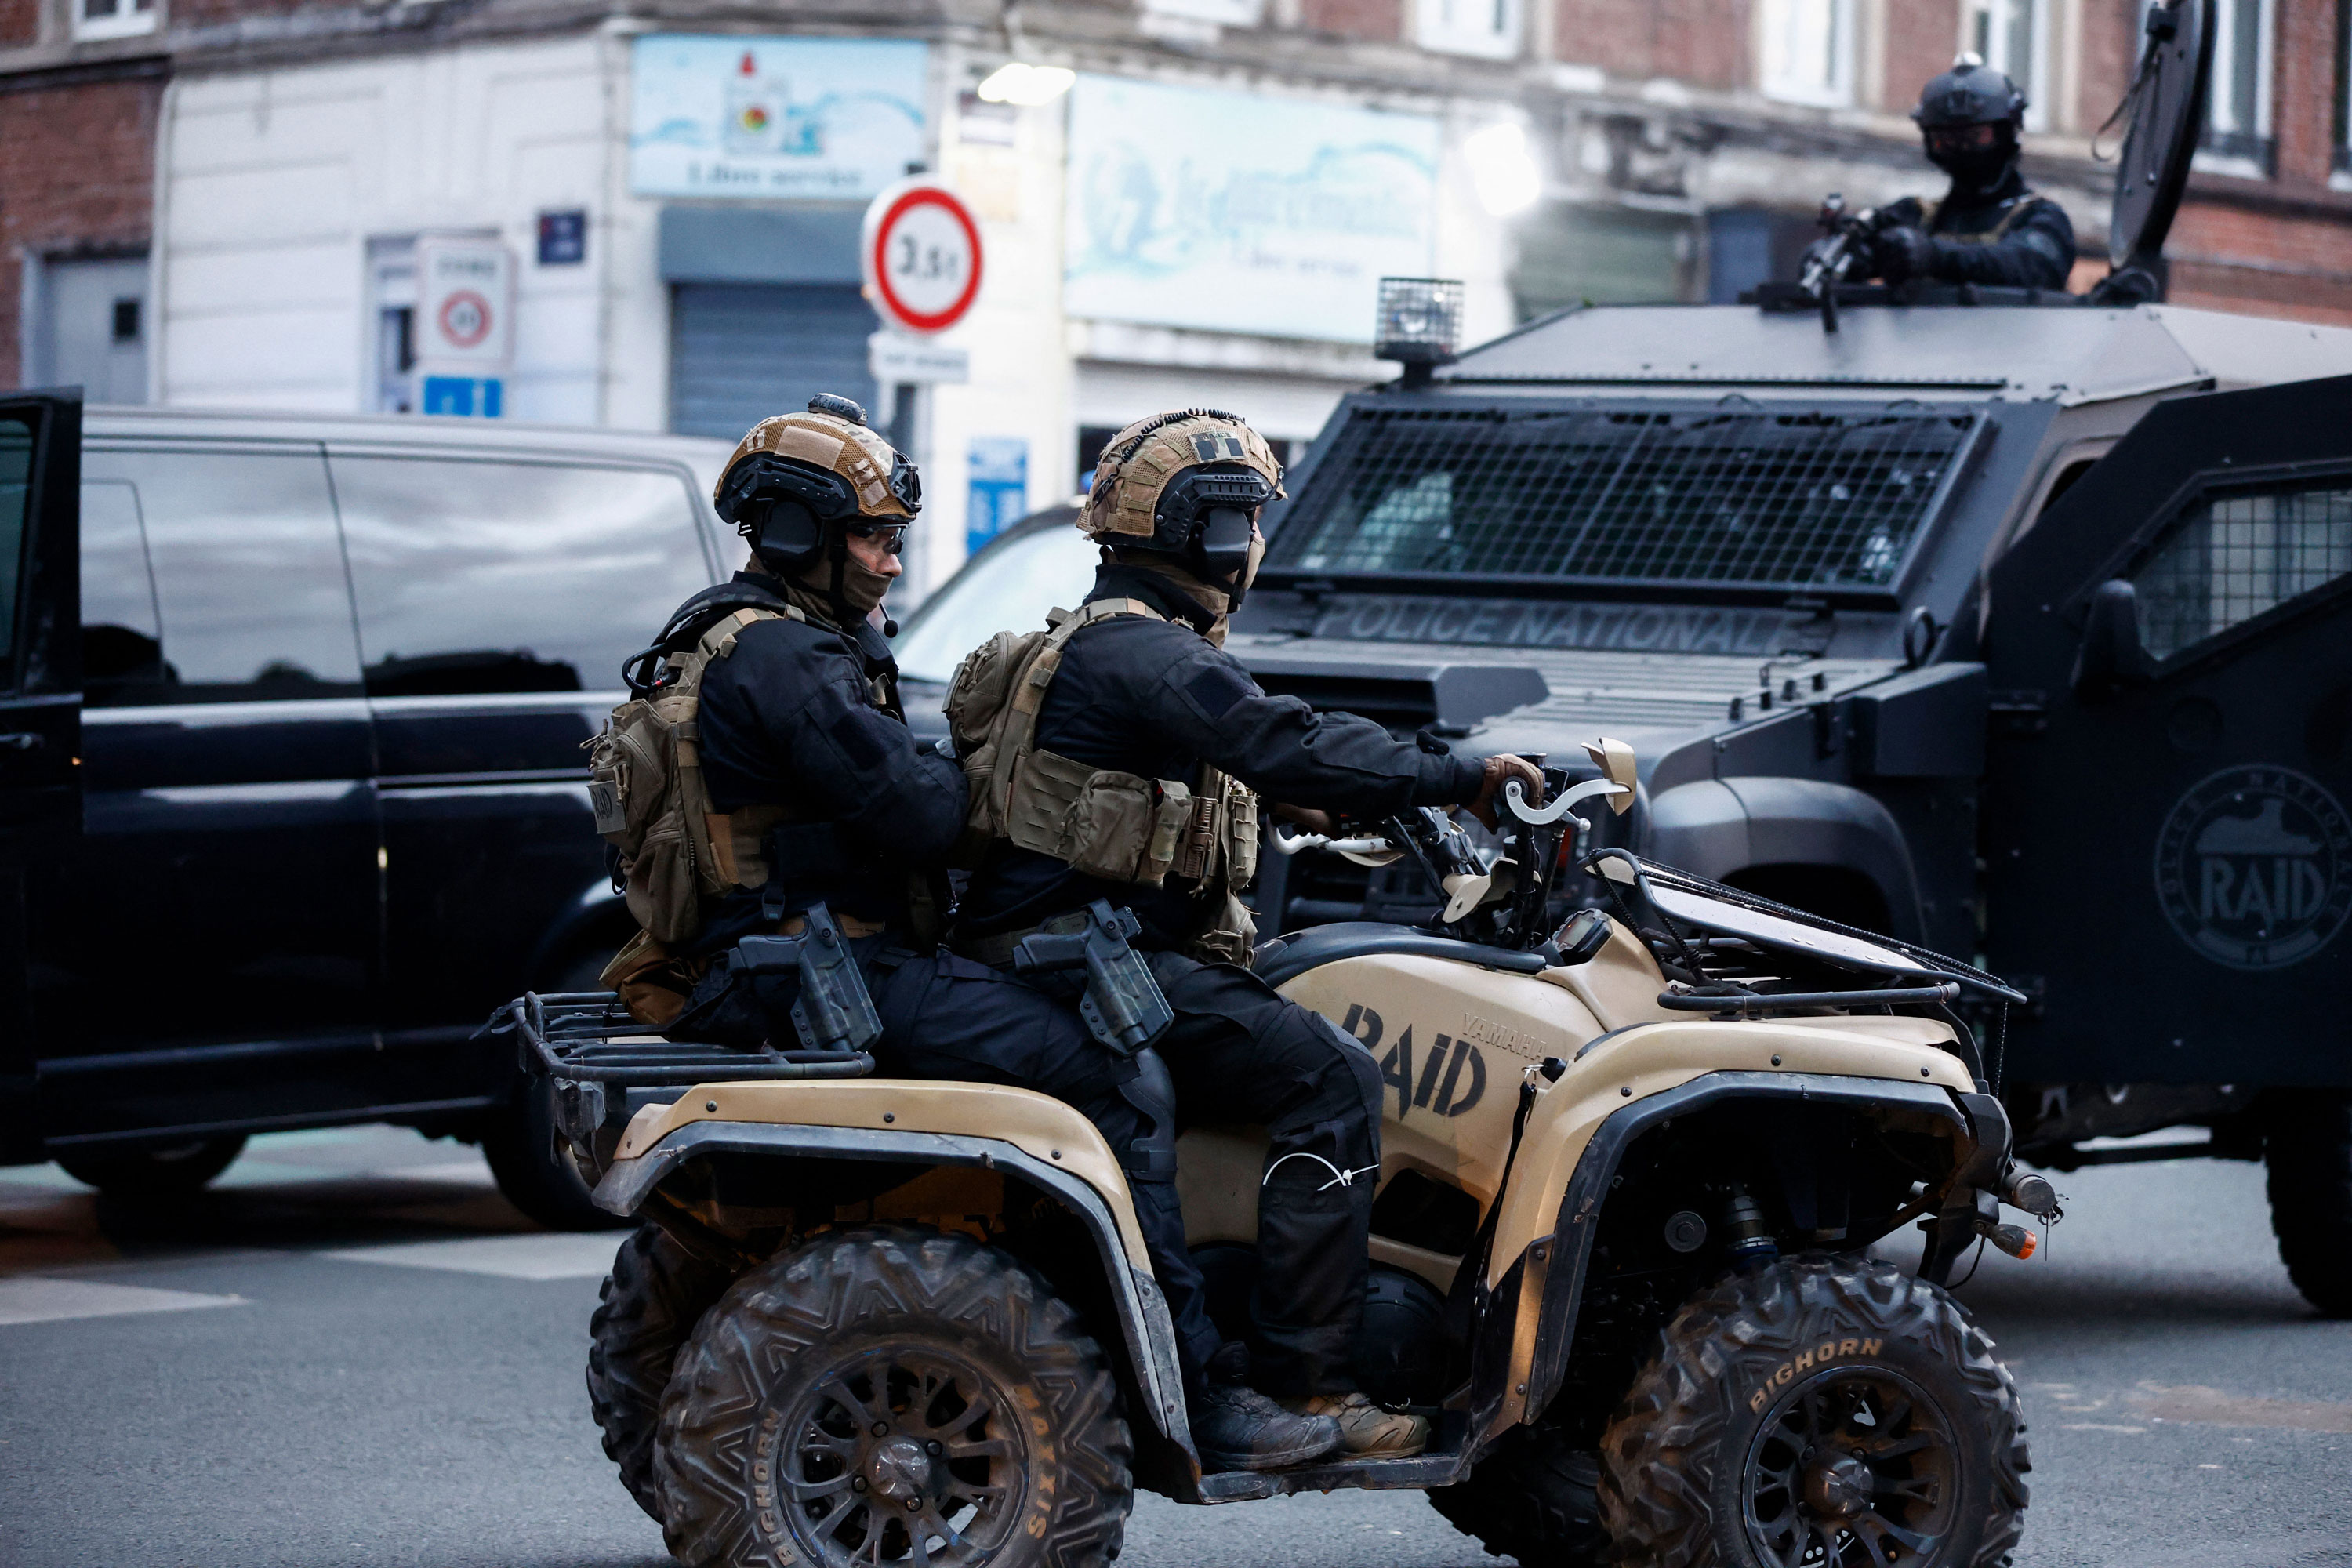 Police officers of unit RAID (Research, Assistance, Intervention, Deterrence) ride a quad during protests in Lille, northern France, on June 29.